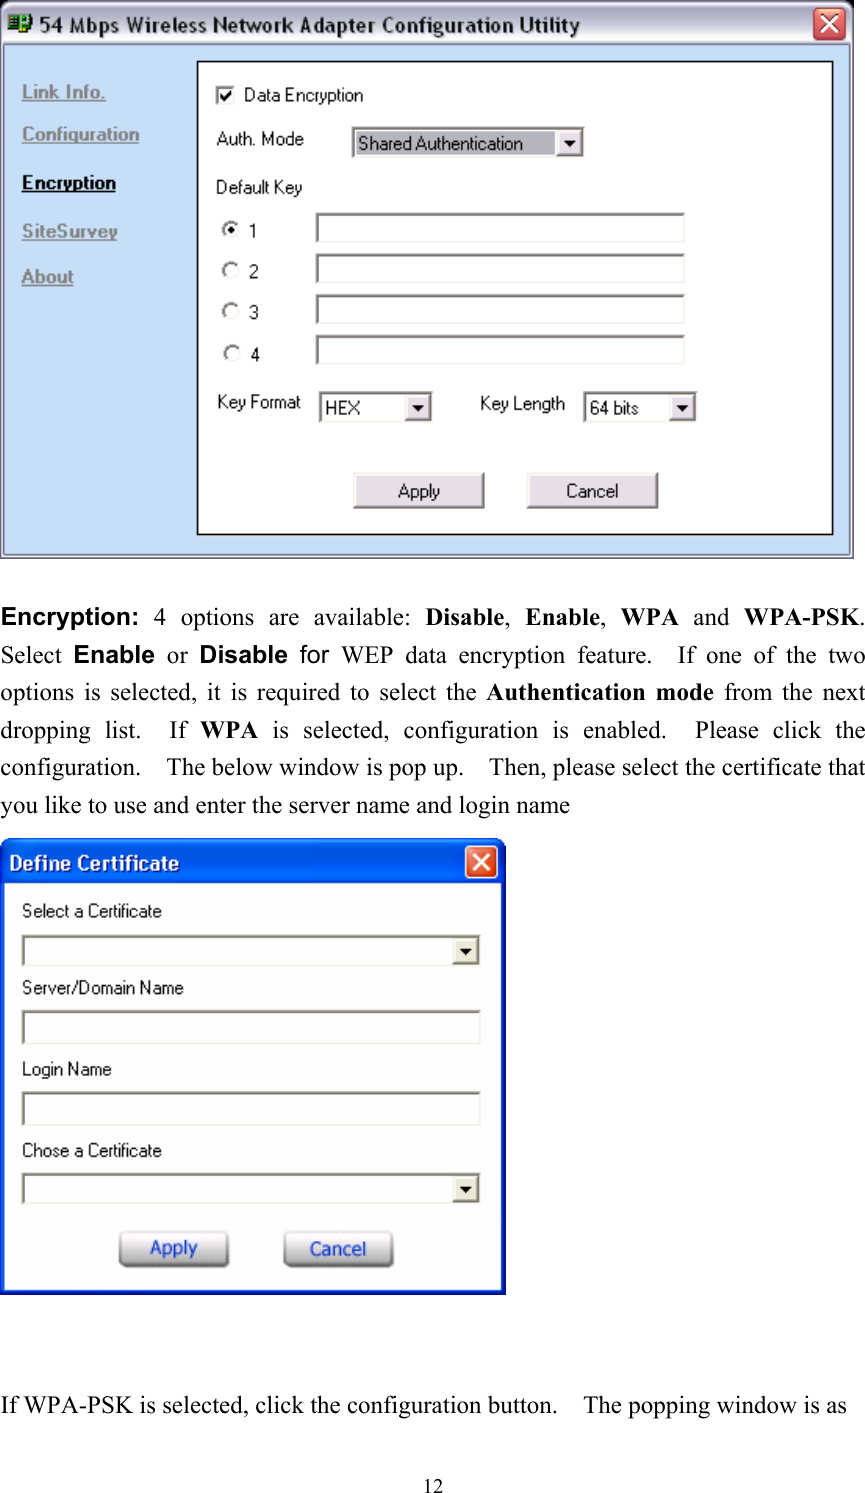   Encryption:  4 options are available: Disable,  Enable,  WPA and WPA-PSK.  Select  Enable  or  Disable  for  WEP data encryption feature.  If one of the two options is selected, it is required to select the Authentication mode from the next dropping list.  If WPA  is selected, configuration is enabled.  Please click the configuration.    The below window is pop up.    Then, please select the certificate that you like to use and enter the server name and login name    If WPA-PSK is selected, click the configuration button.    The popping window is as  12